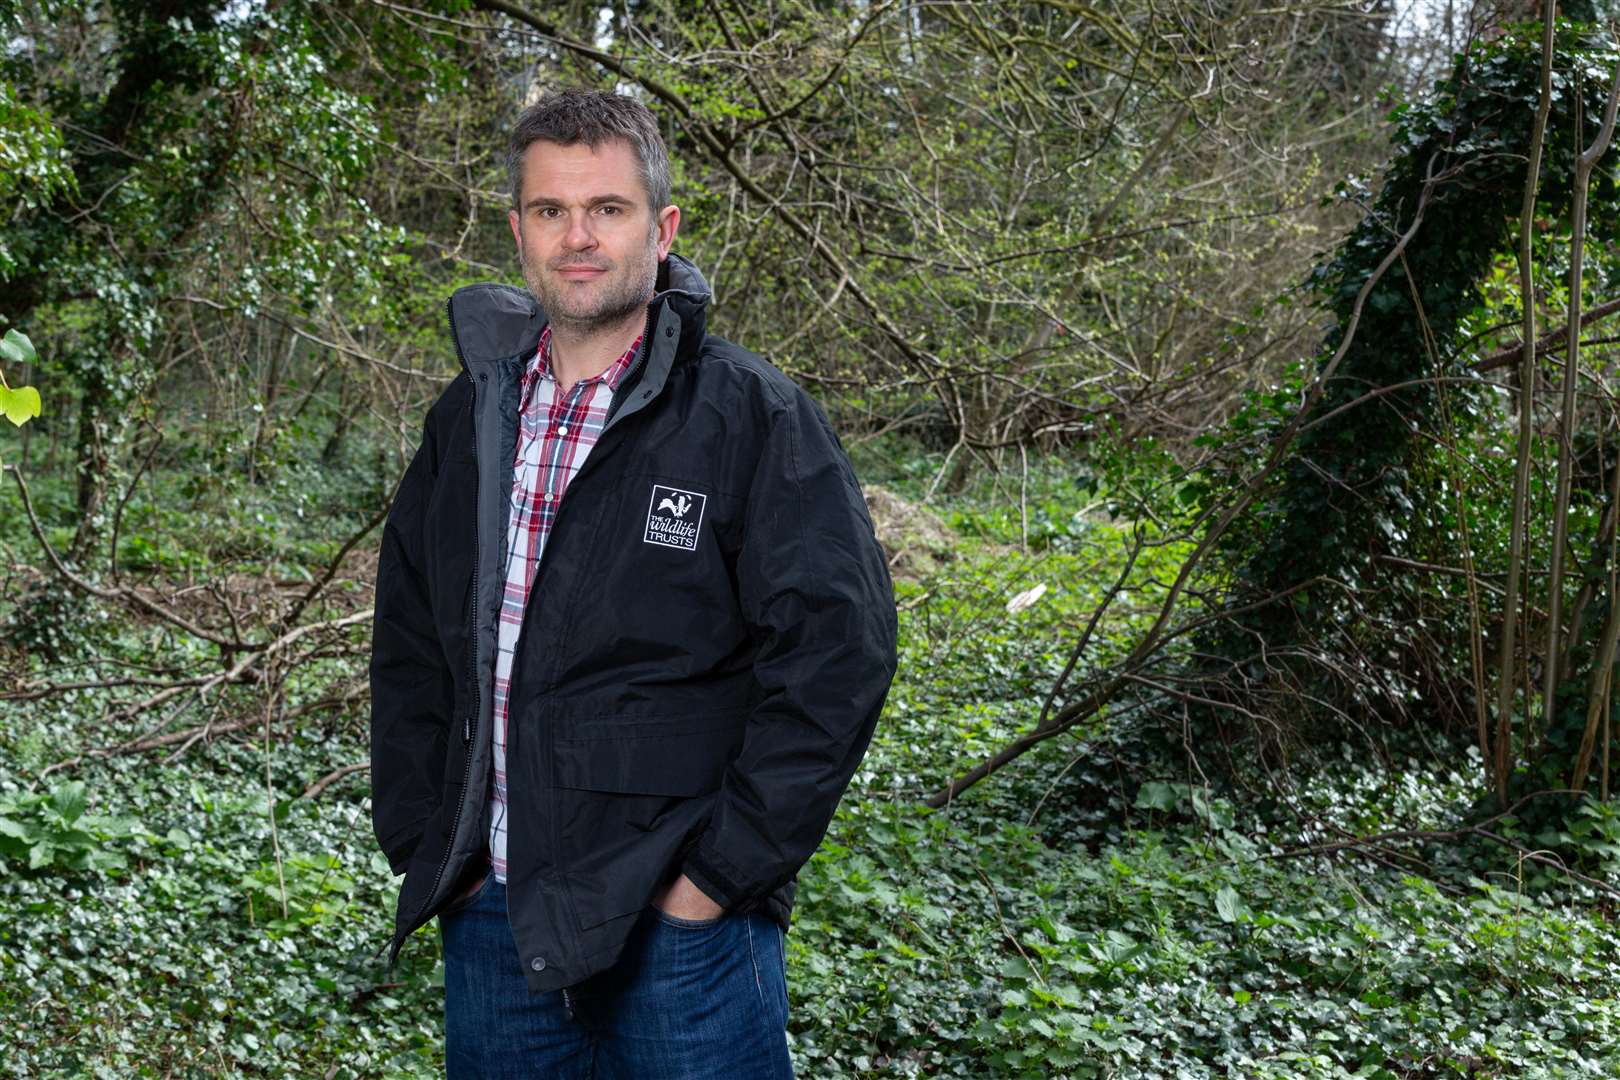 Craig Bennett is the new chief executive of the Wildlife Trusts (Richard Jinman)